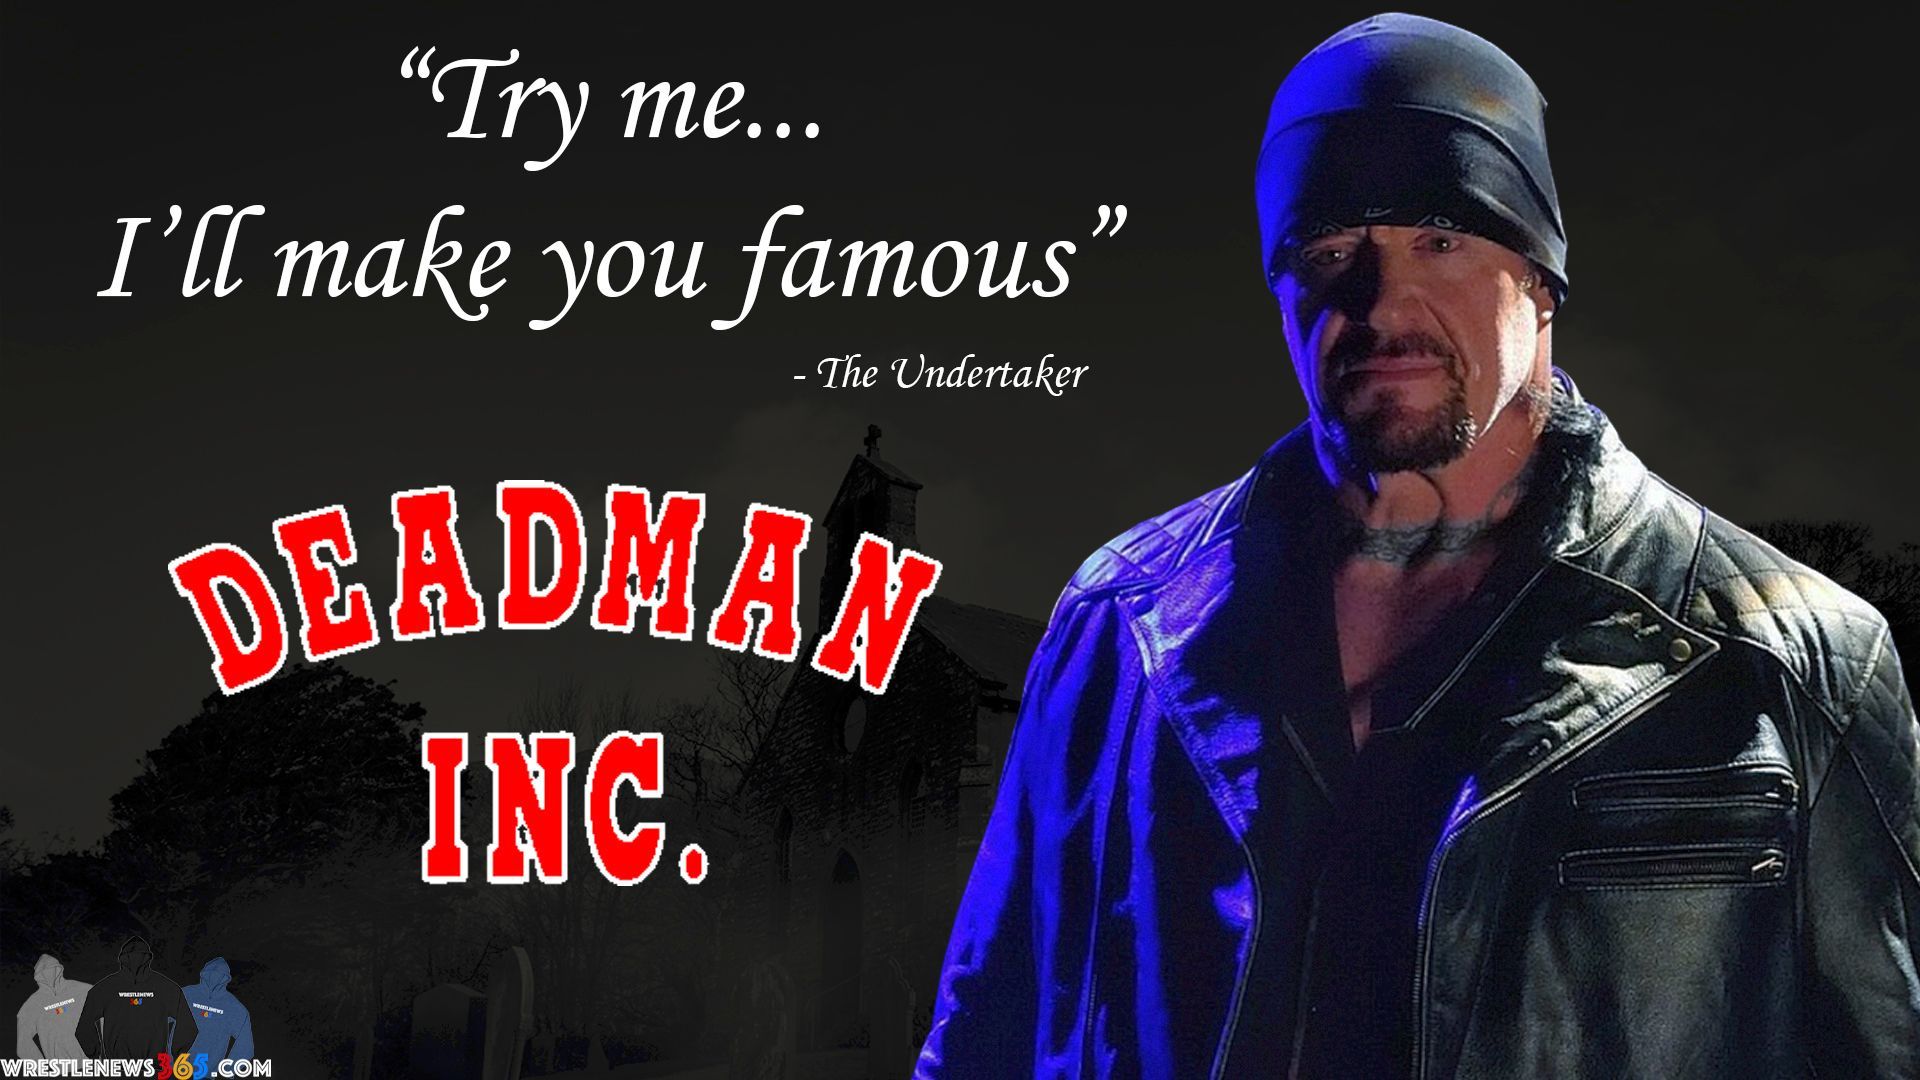 Owen WrestleNews365's quote comes from the American Badass himself, The Undertaker. Undertaker seemingly switched back to the biker version of the #Undertaker character Monday Night on Raw. Are